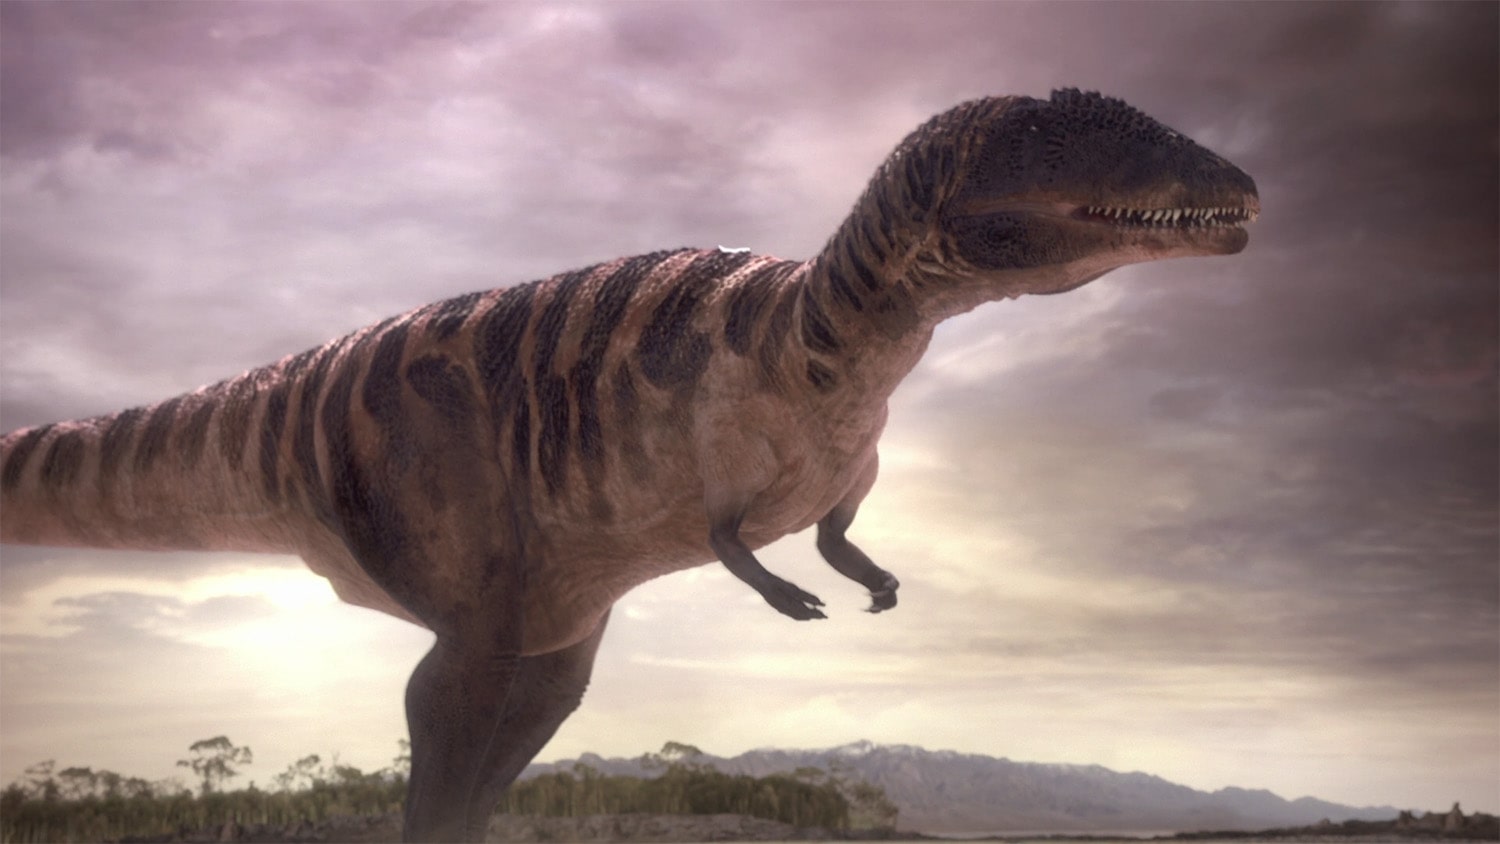 24 interesting facts about Carcharodontosaurus